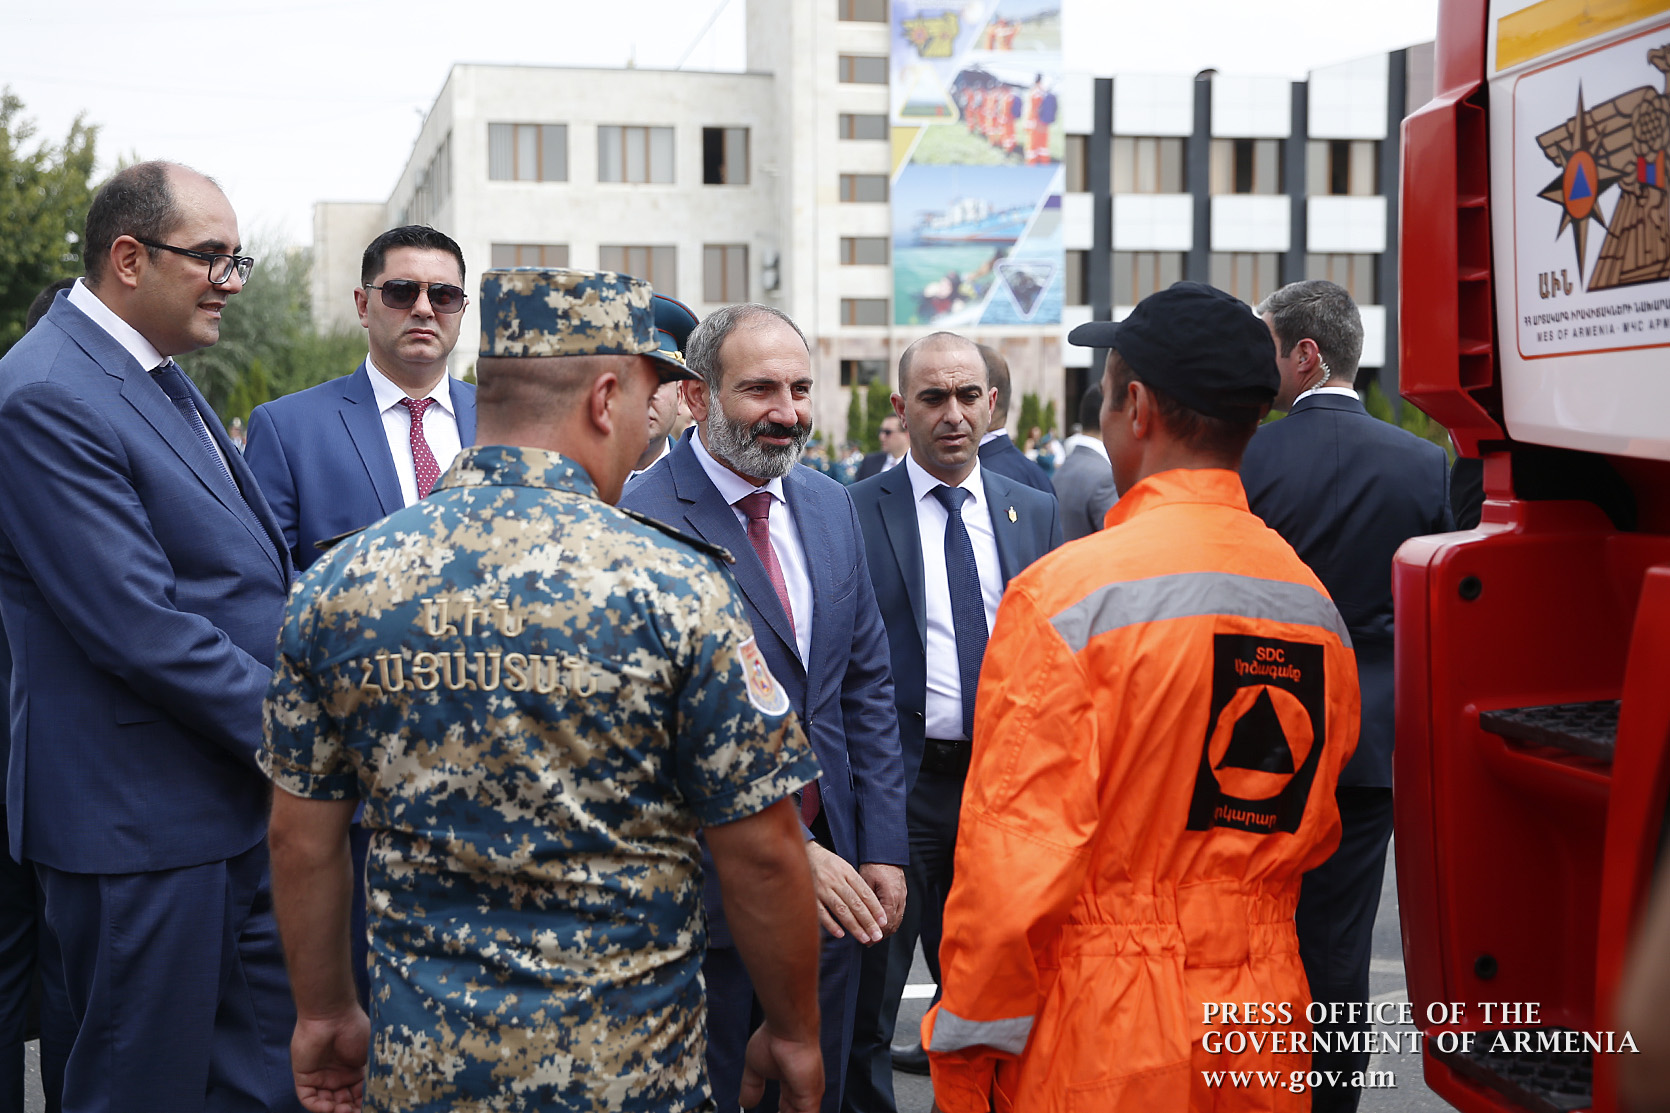 PM visits Ministry of Emergency Situations on Emergency Worker’s Day